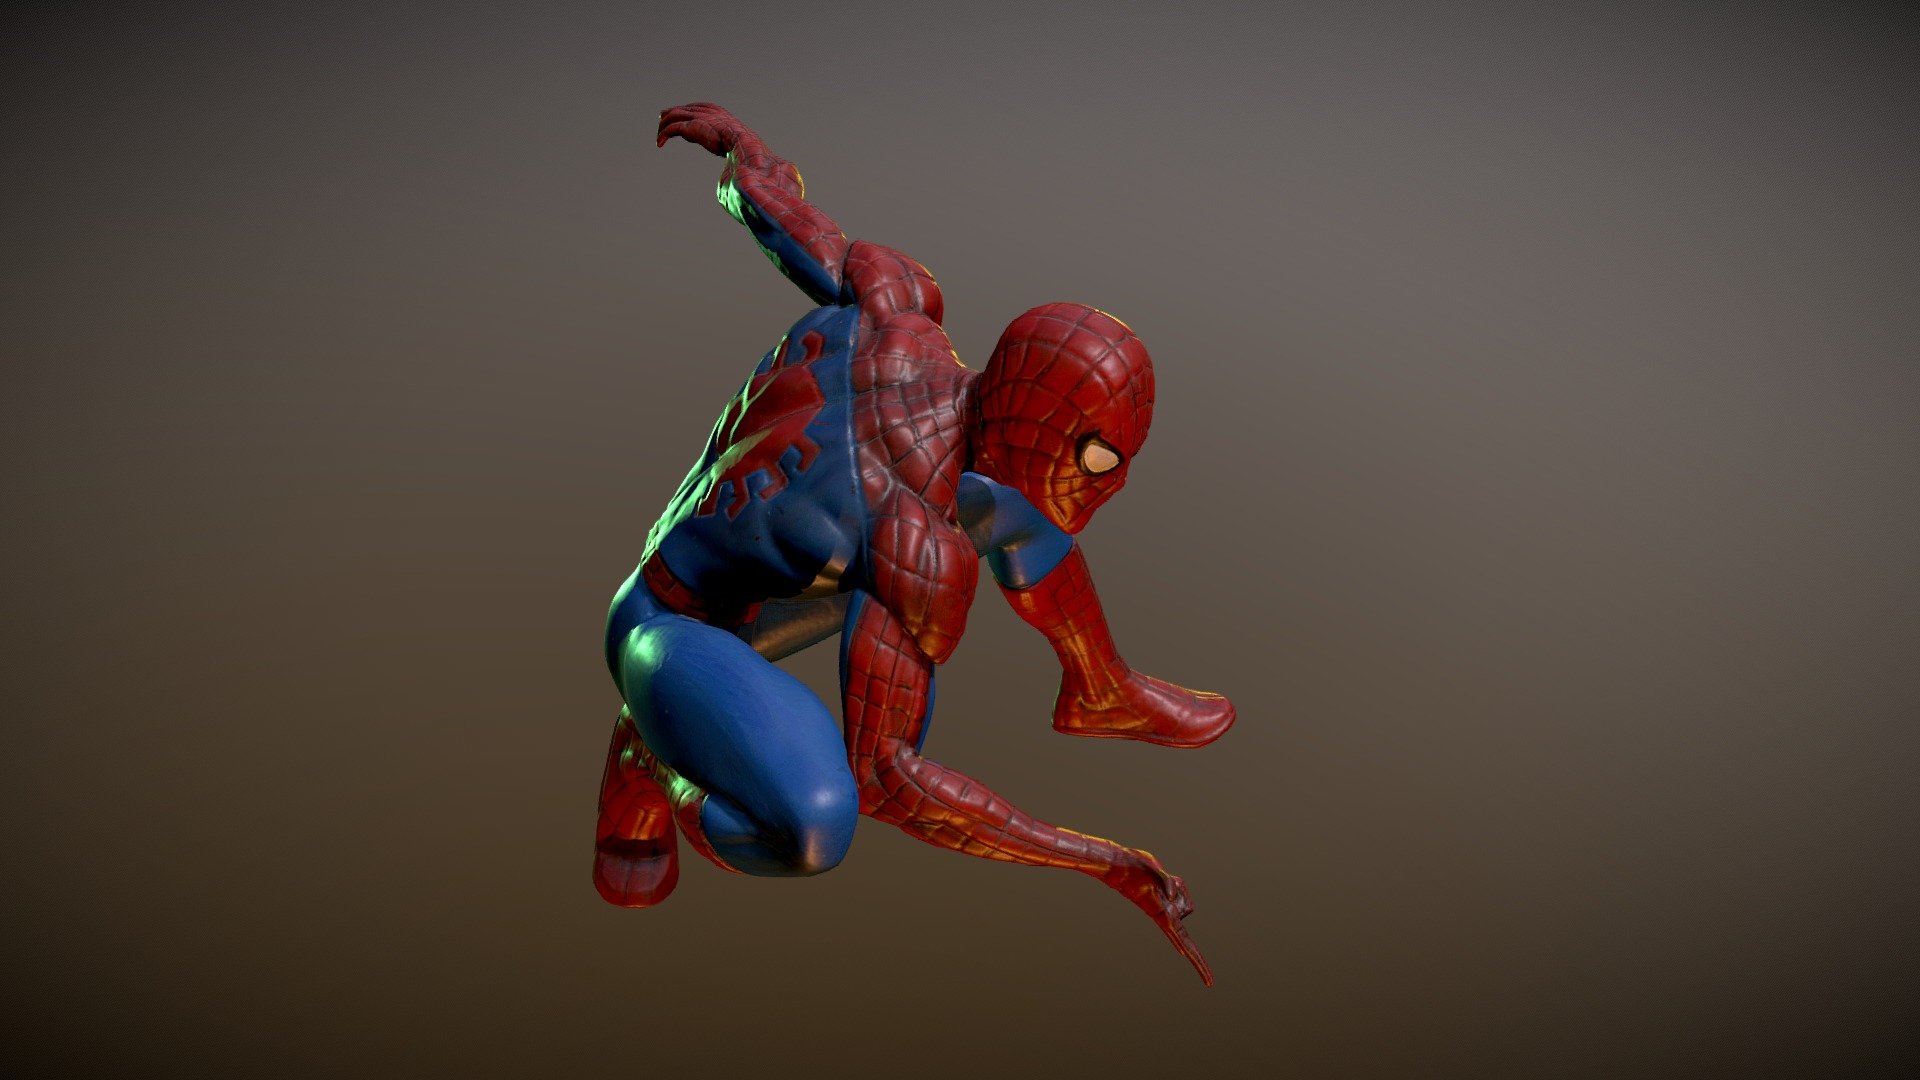 HOW TO: Pose Your Spider Man Action Figure in Dynamic Style Poses - YouTube